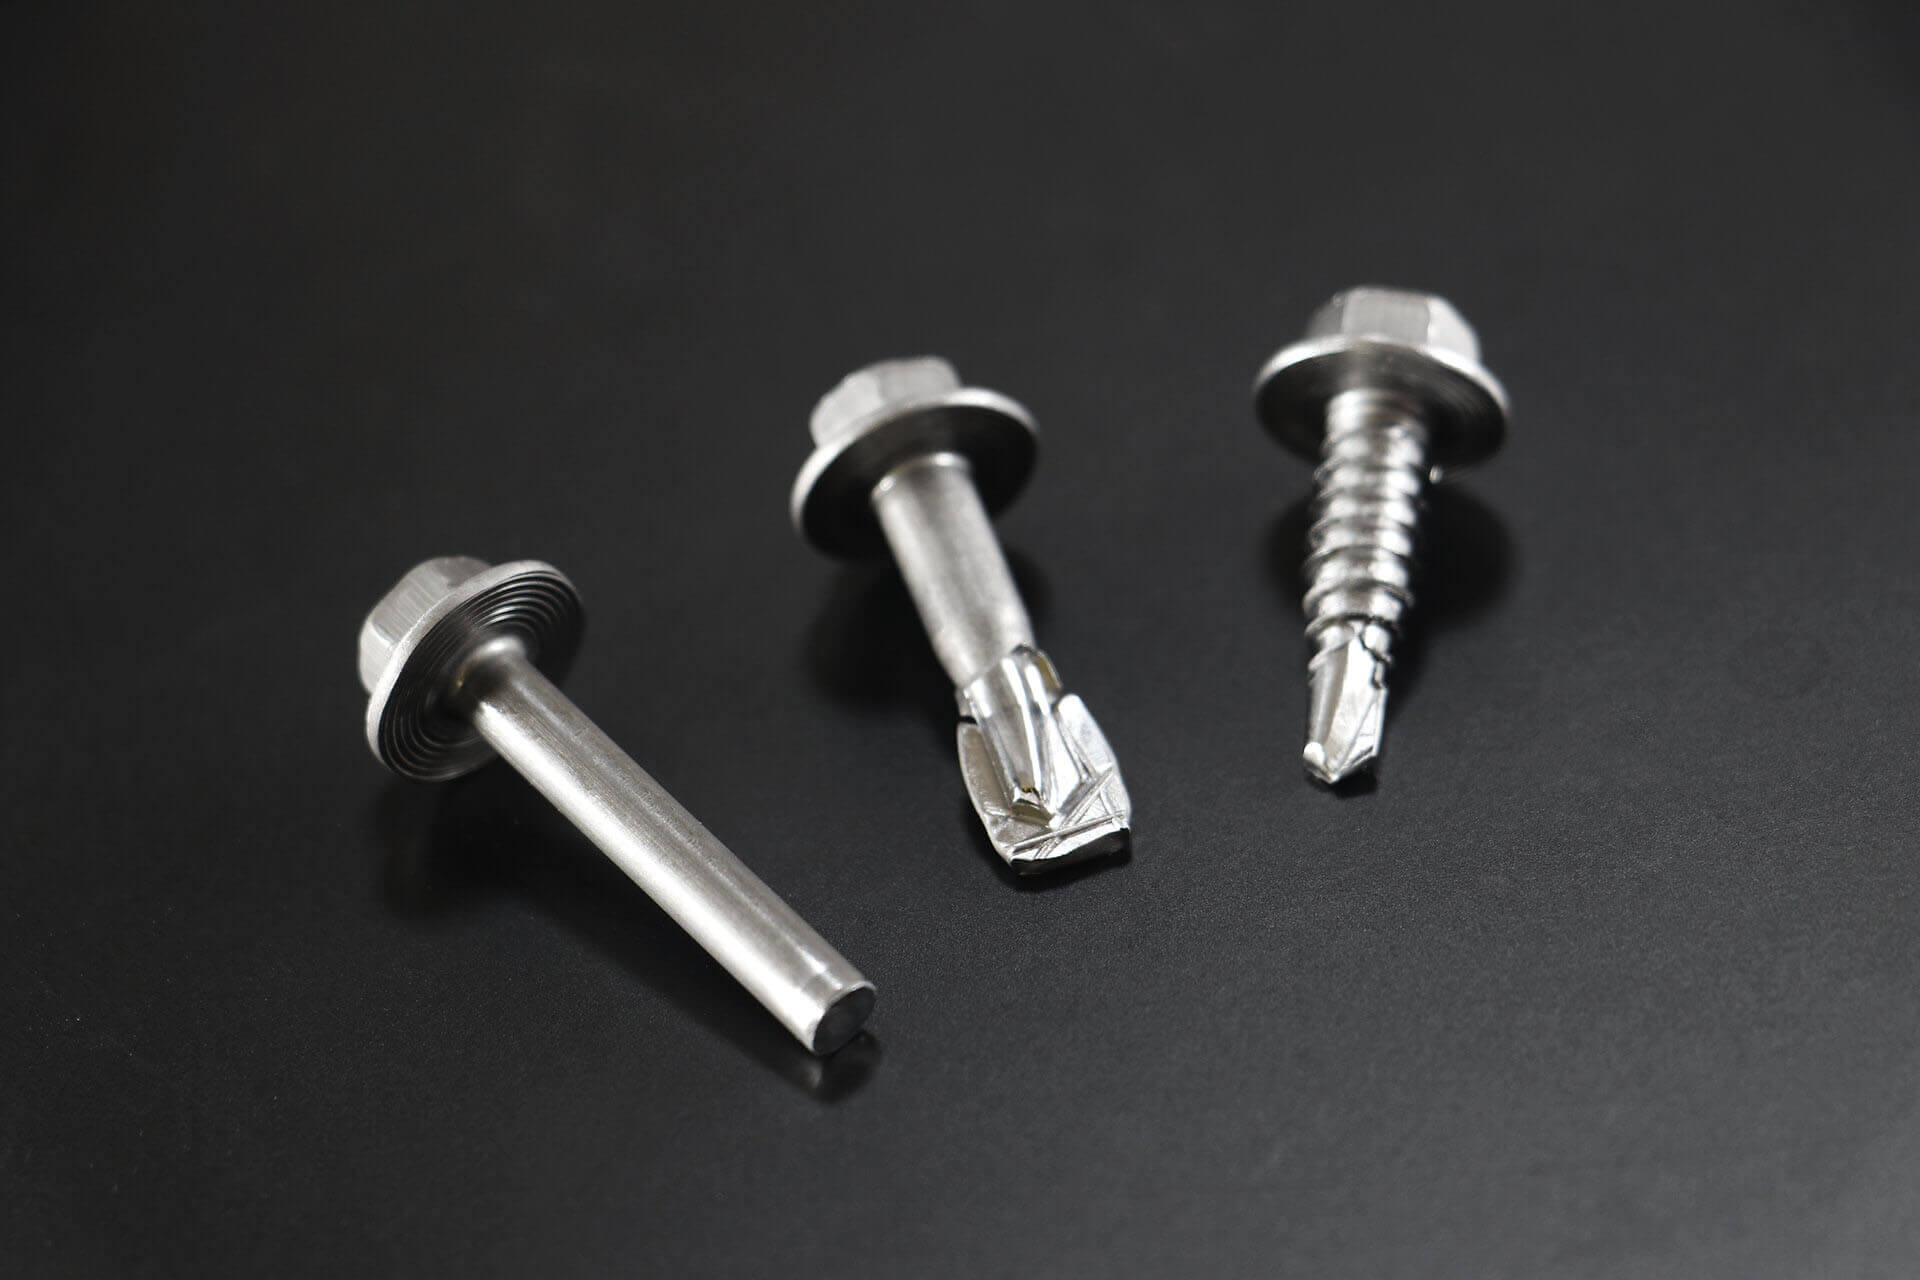 BDN-Fasteners® - FACTORY - Fasteners Production Process